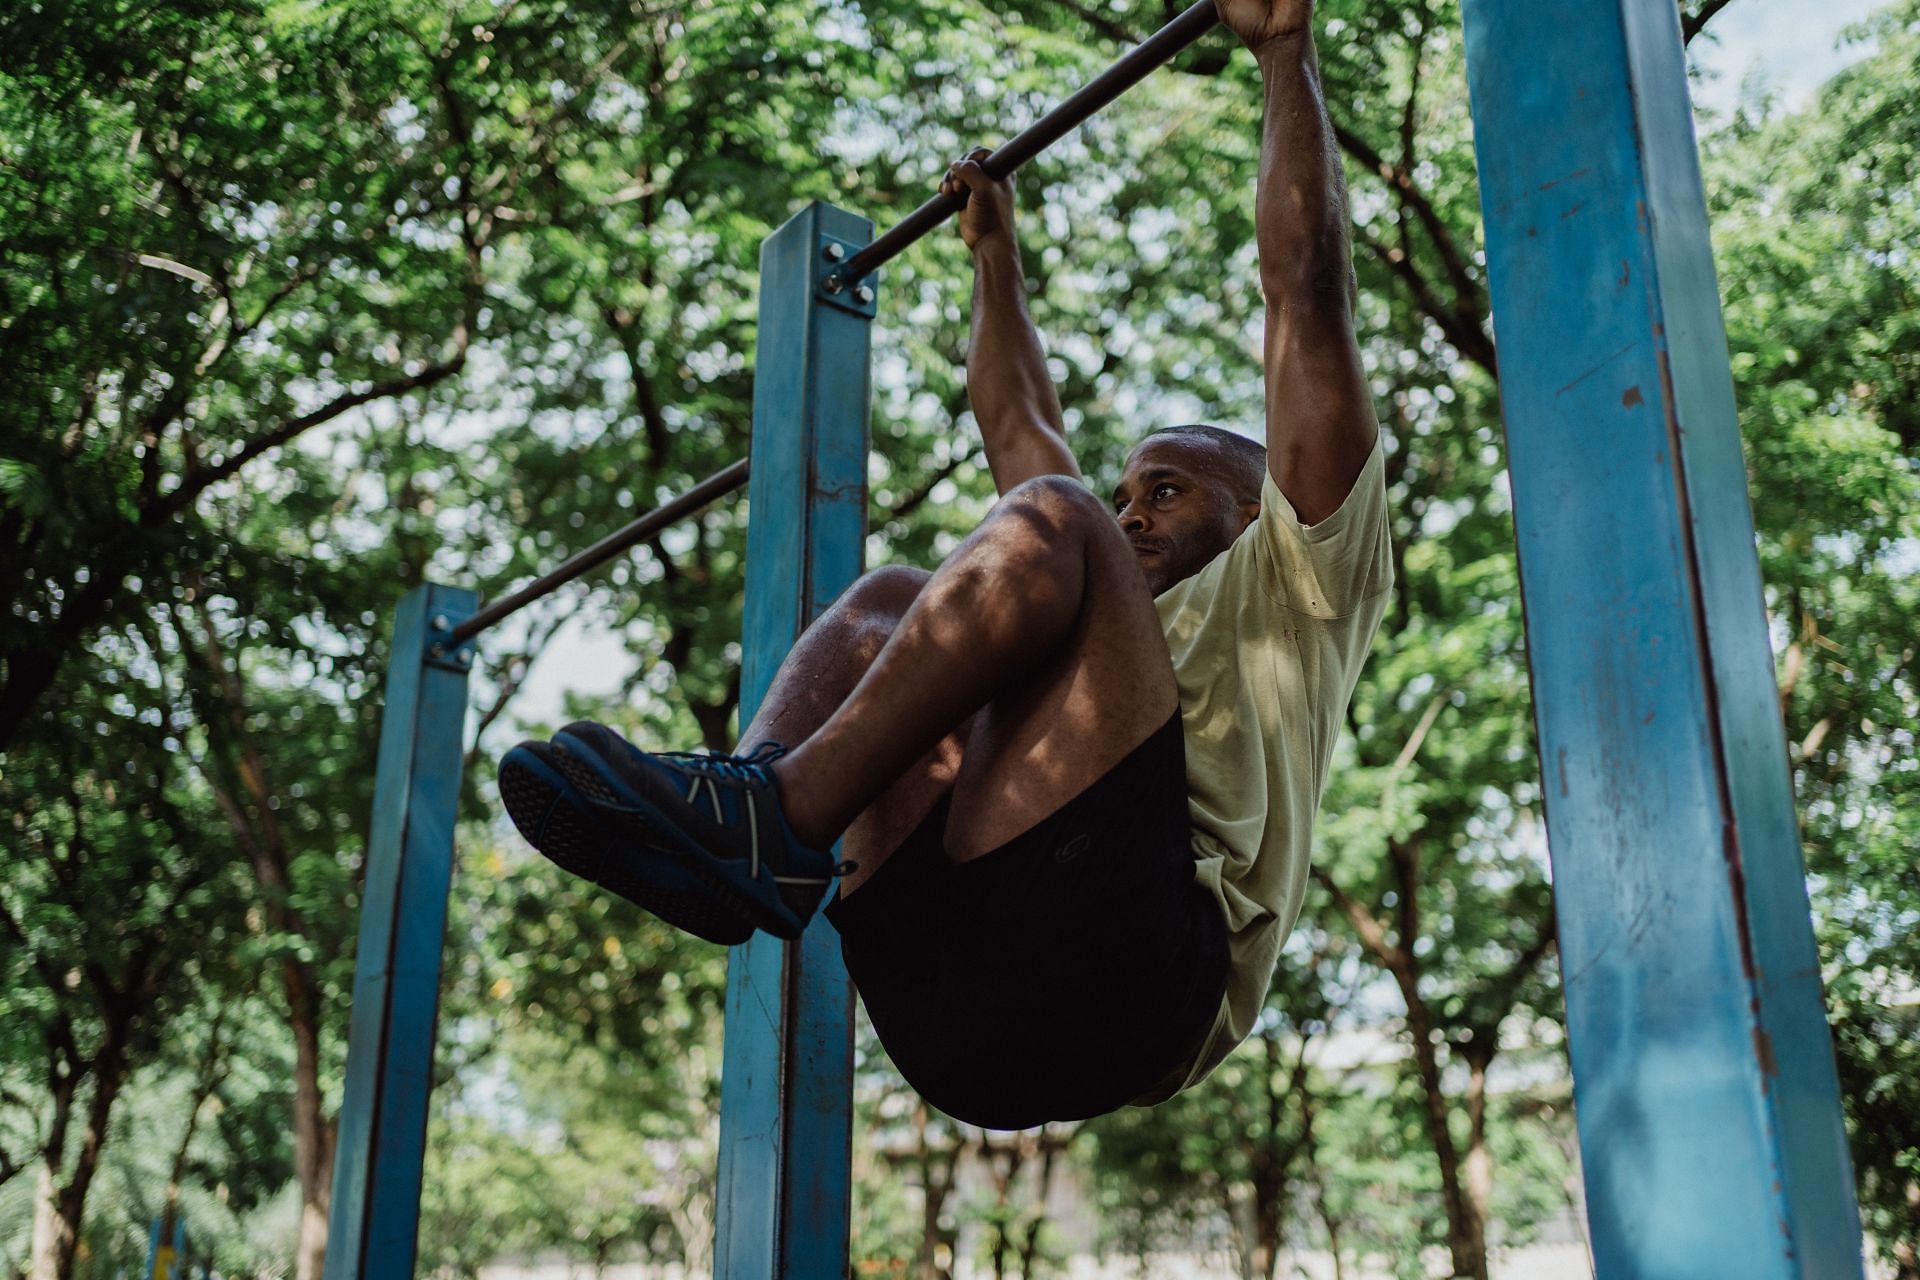 Pull-up bar is a great exercise equipment to strengthen the back. (Image via Pexels/ Ketut Subiyanto)